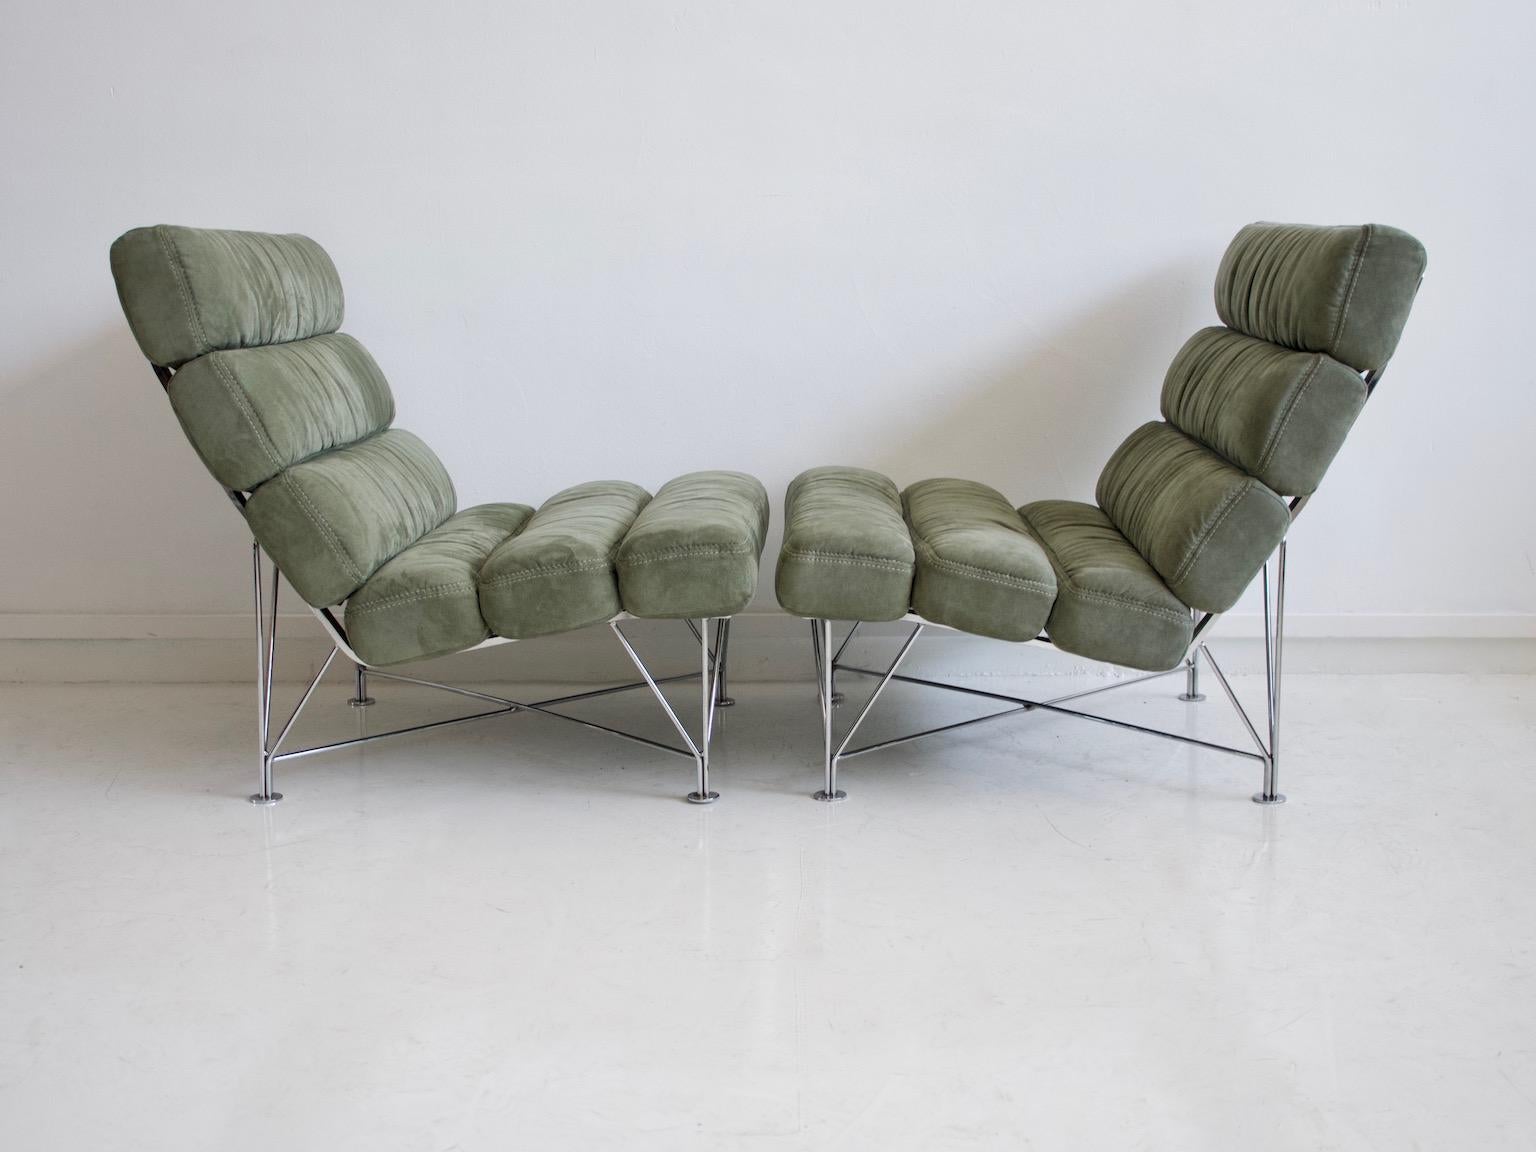 20th Century Pair of Green Lounge Chairs with Steel Frame by DUX Design Team For Sale